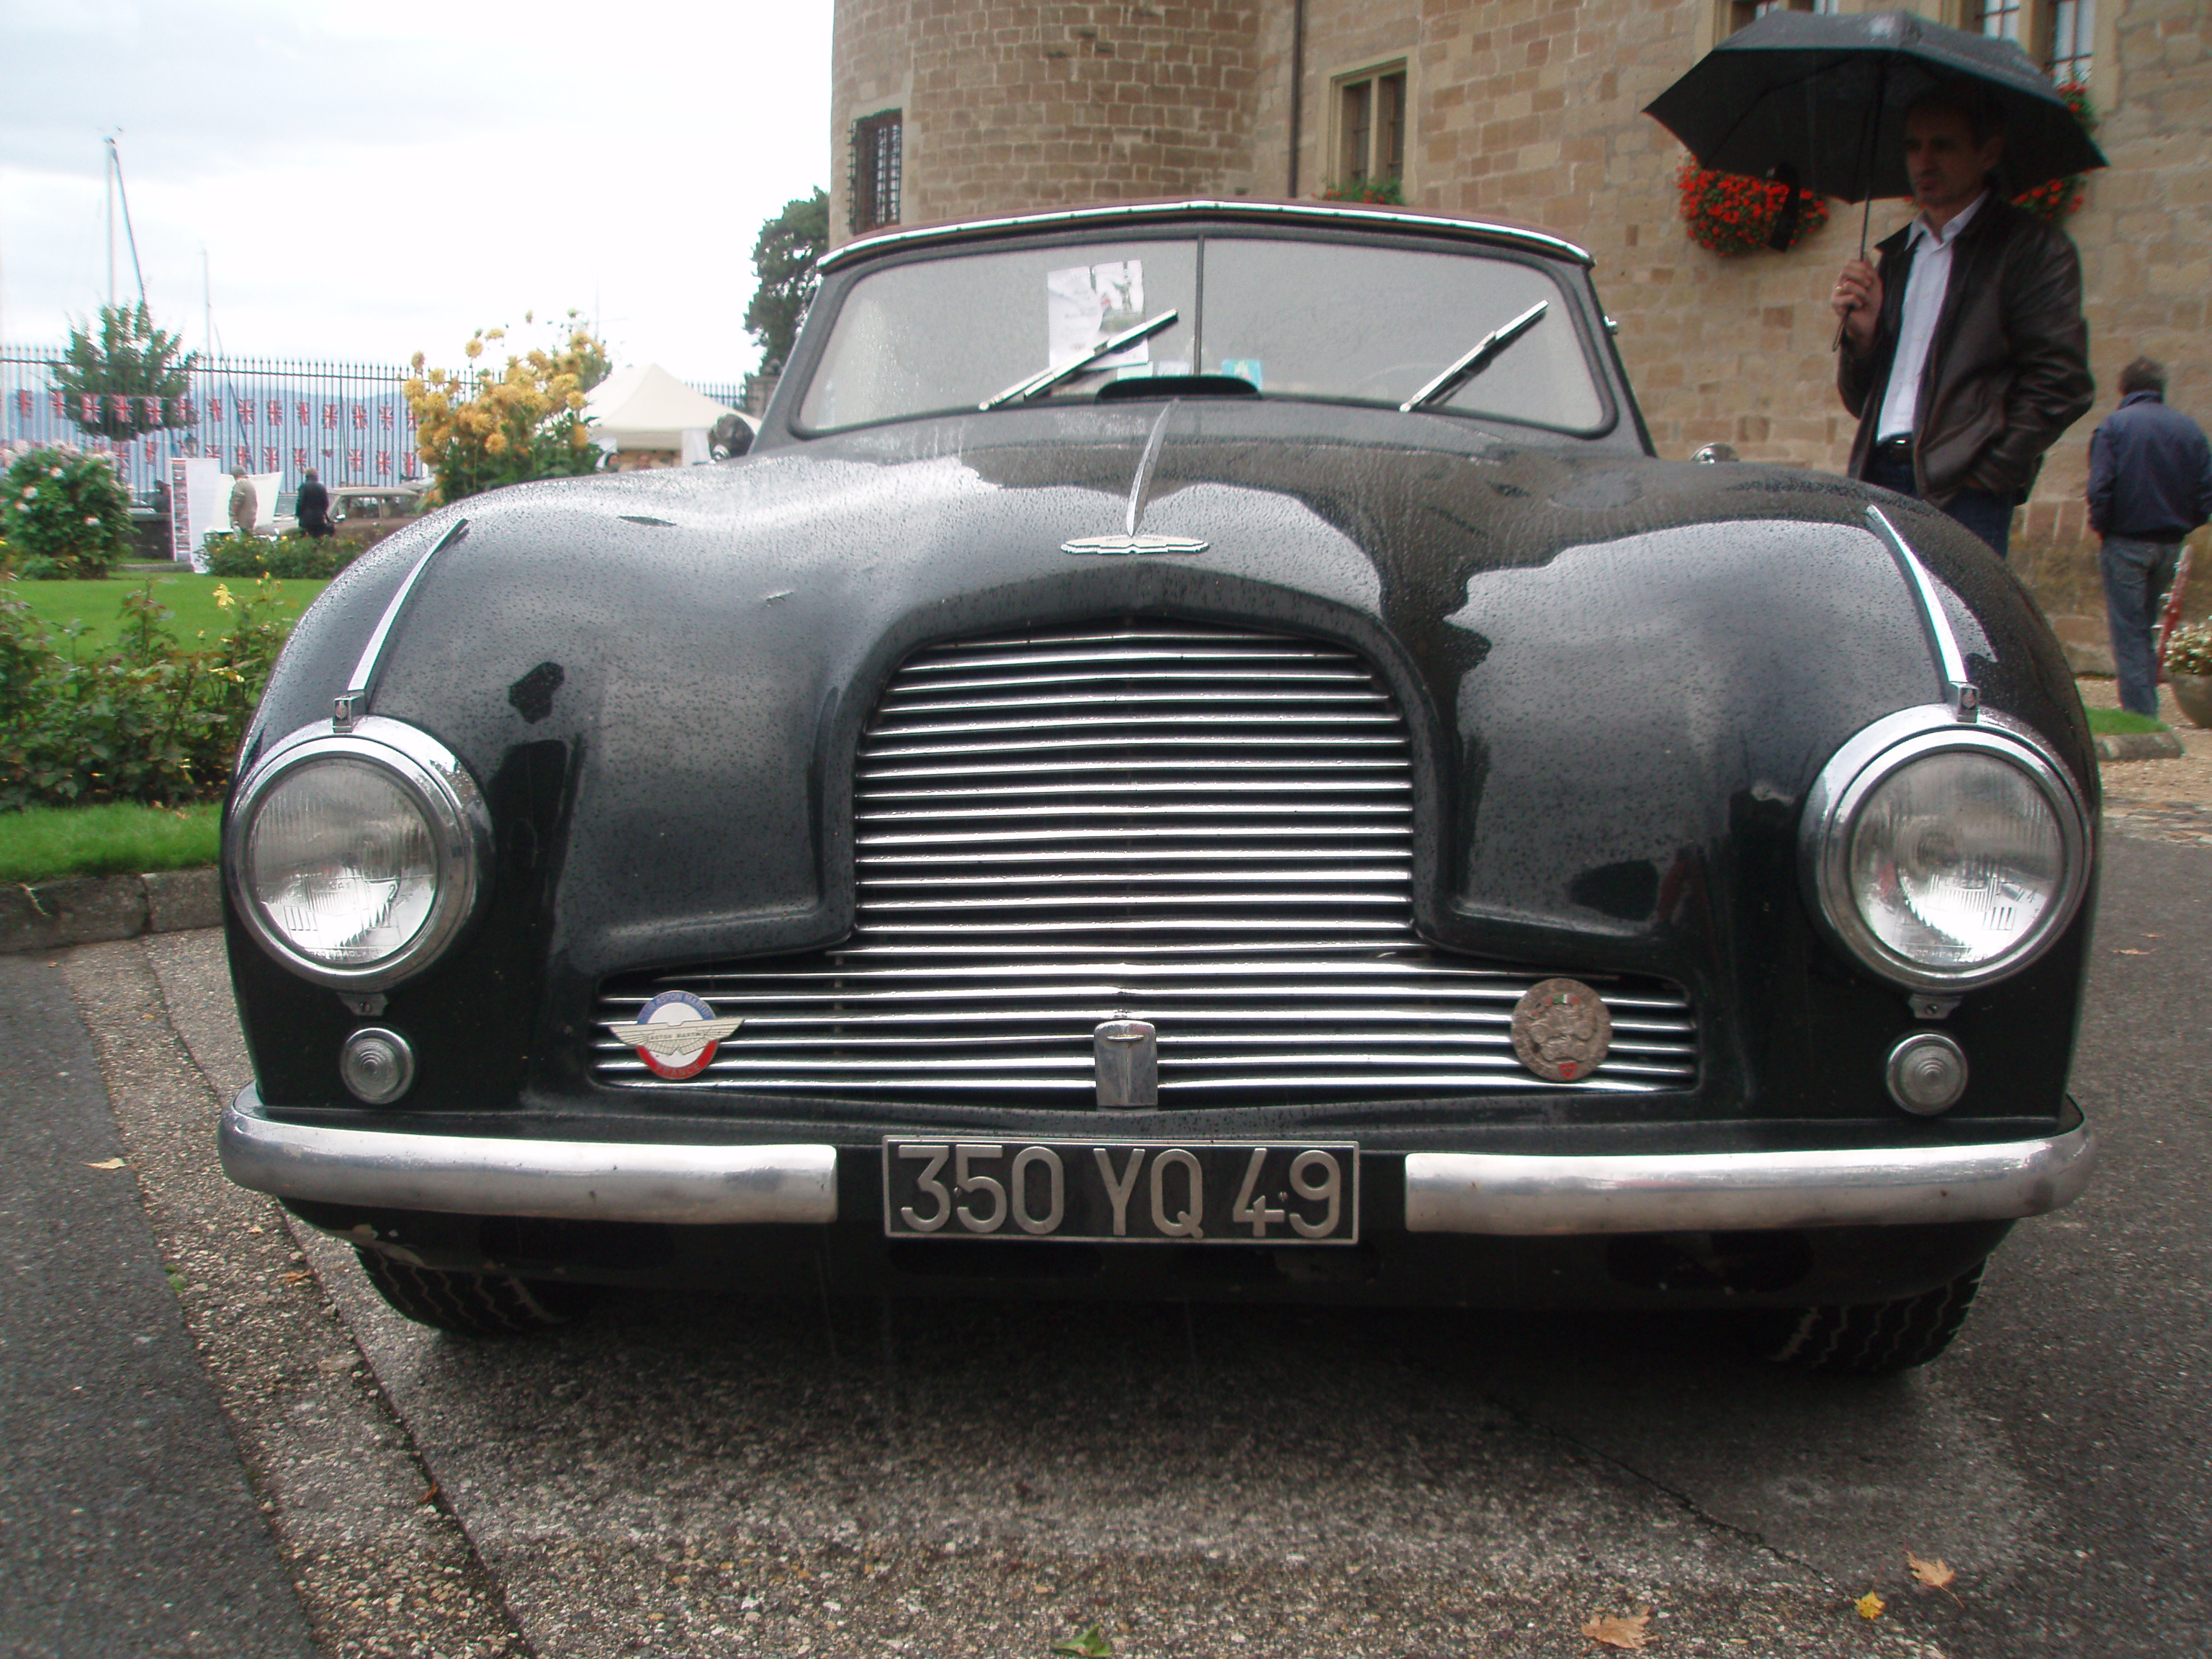 Aston Martin DB2 in Morges 2013 - Front